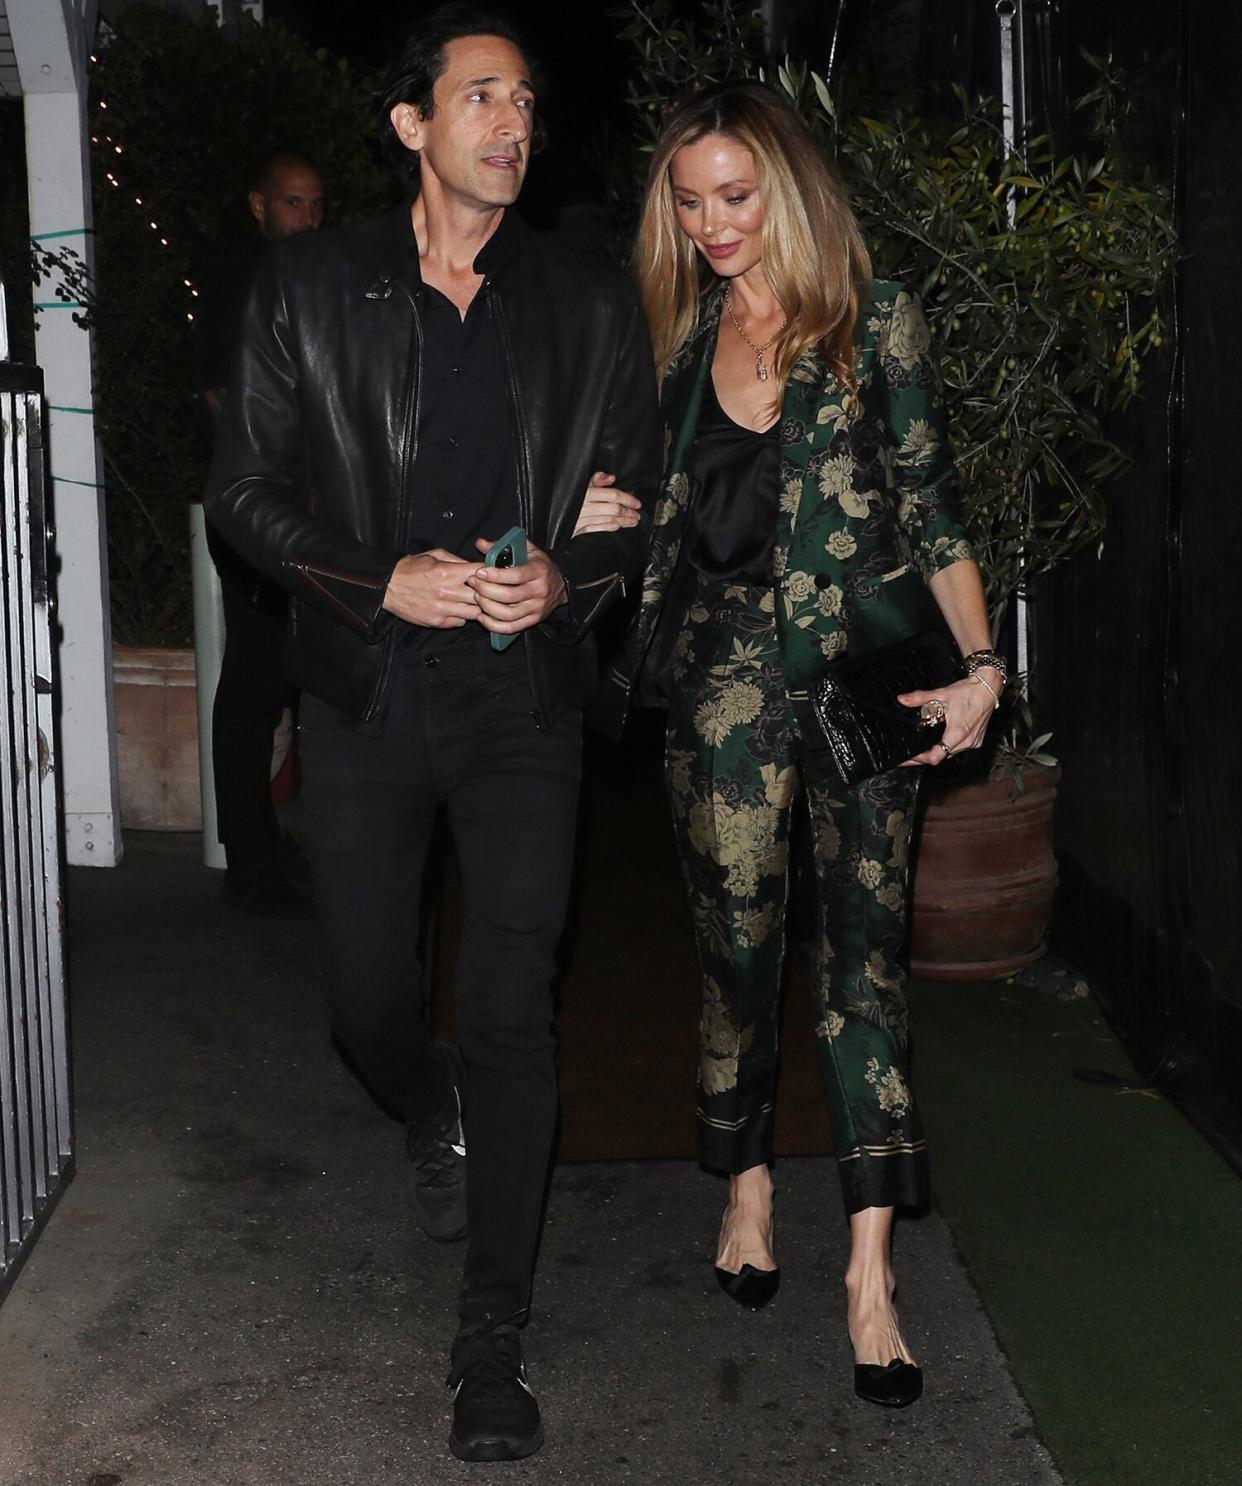 *EXCLUSIVE* - Adrien Brody and Georgina Chapman walk arm in arm as they are spotted exiting Italian restaurant Giorgio Baldi after having a romantic dinner date for two